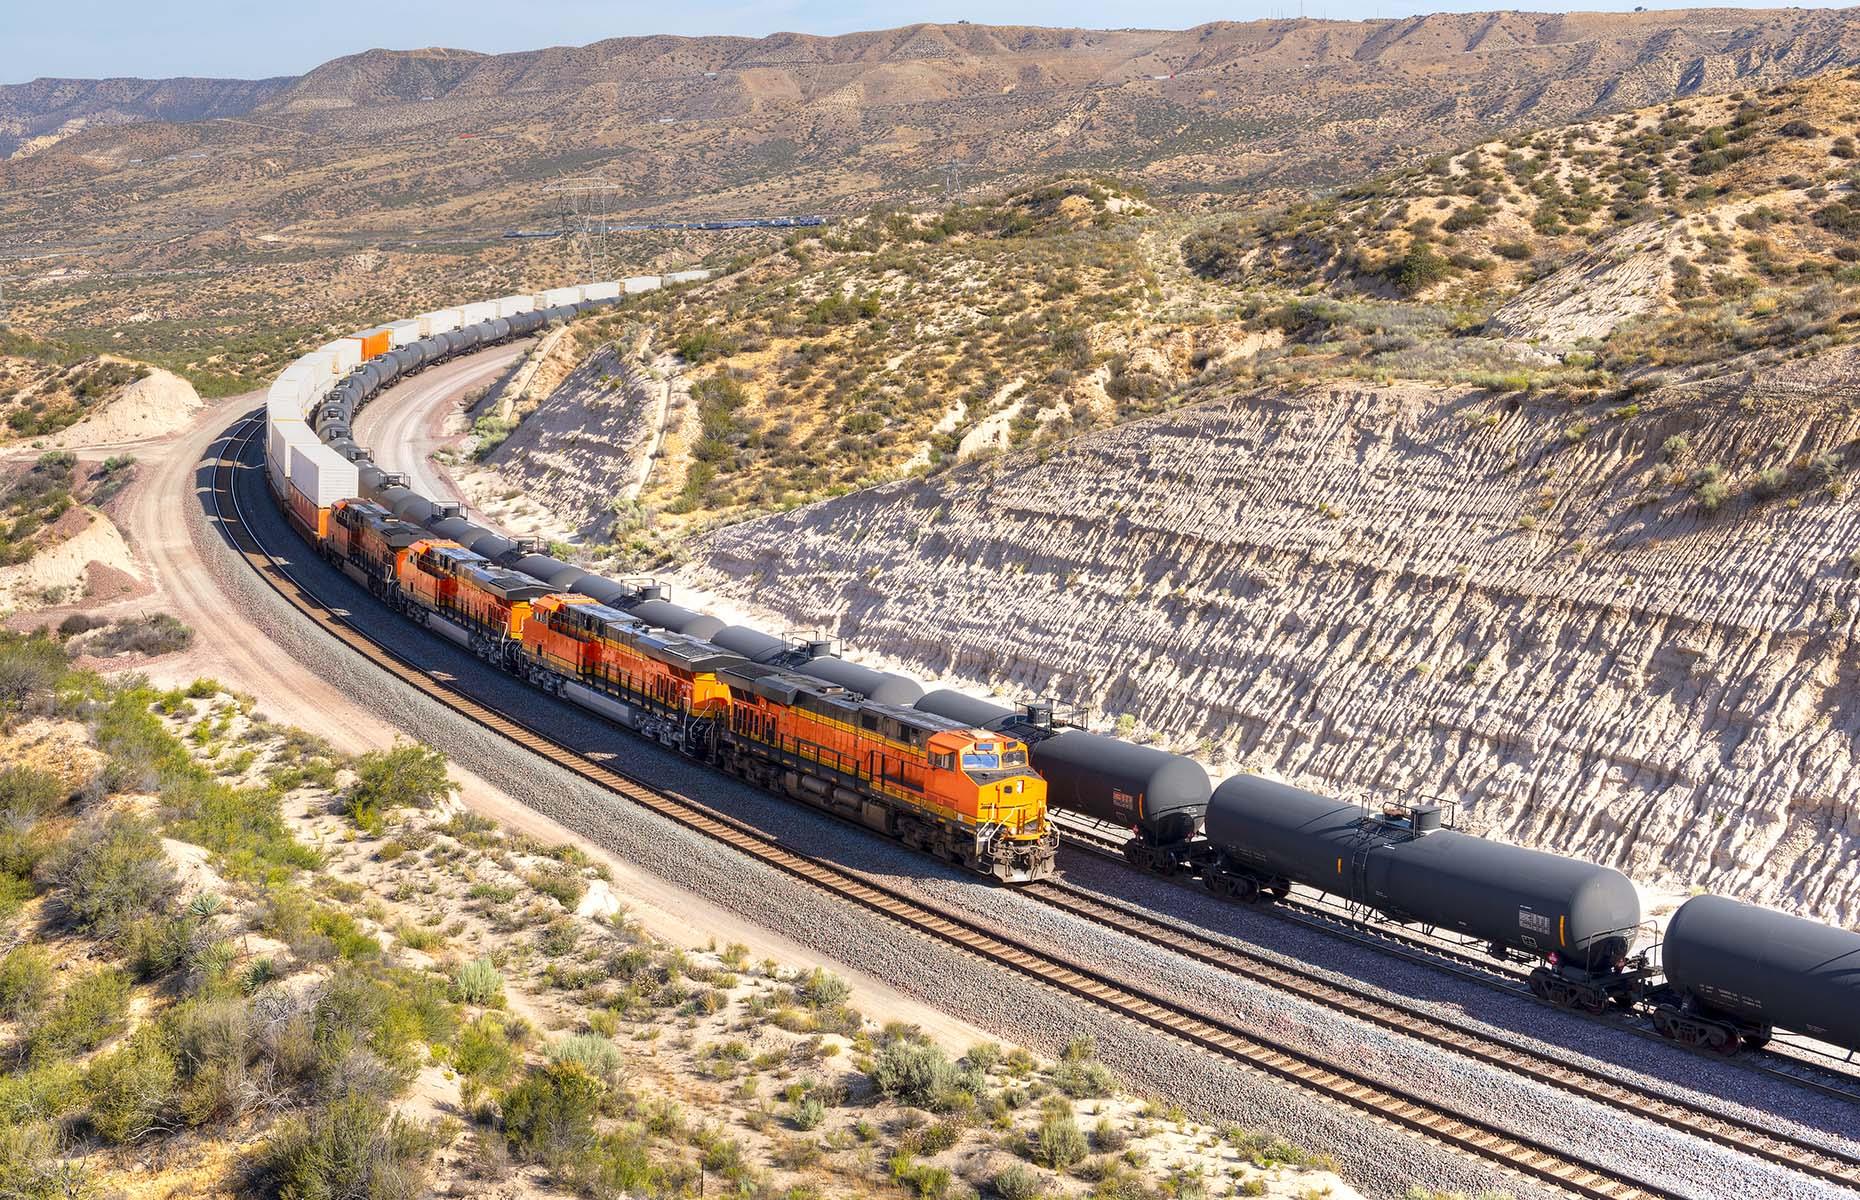 <p>You might be surprised to hear that the <a href="https://www.railway-technology.com/features/featurethe-worlds-longest-railway-networks-4180878/">US has the largest railway network in the world</a>, and by a large margin. With a total route length over 155,342 miles (250,000km), it's two-and-a-half times longer than the second-largest network in China. It's the US freight rail network that makes up 80% of the staggering length while passenger rail, run by Amtrak, is comprised of more than 30 train routes connecting 500 destinations across 46 American states.</p>